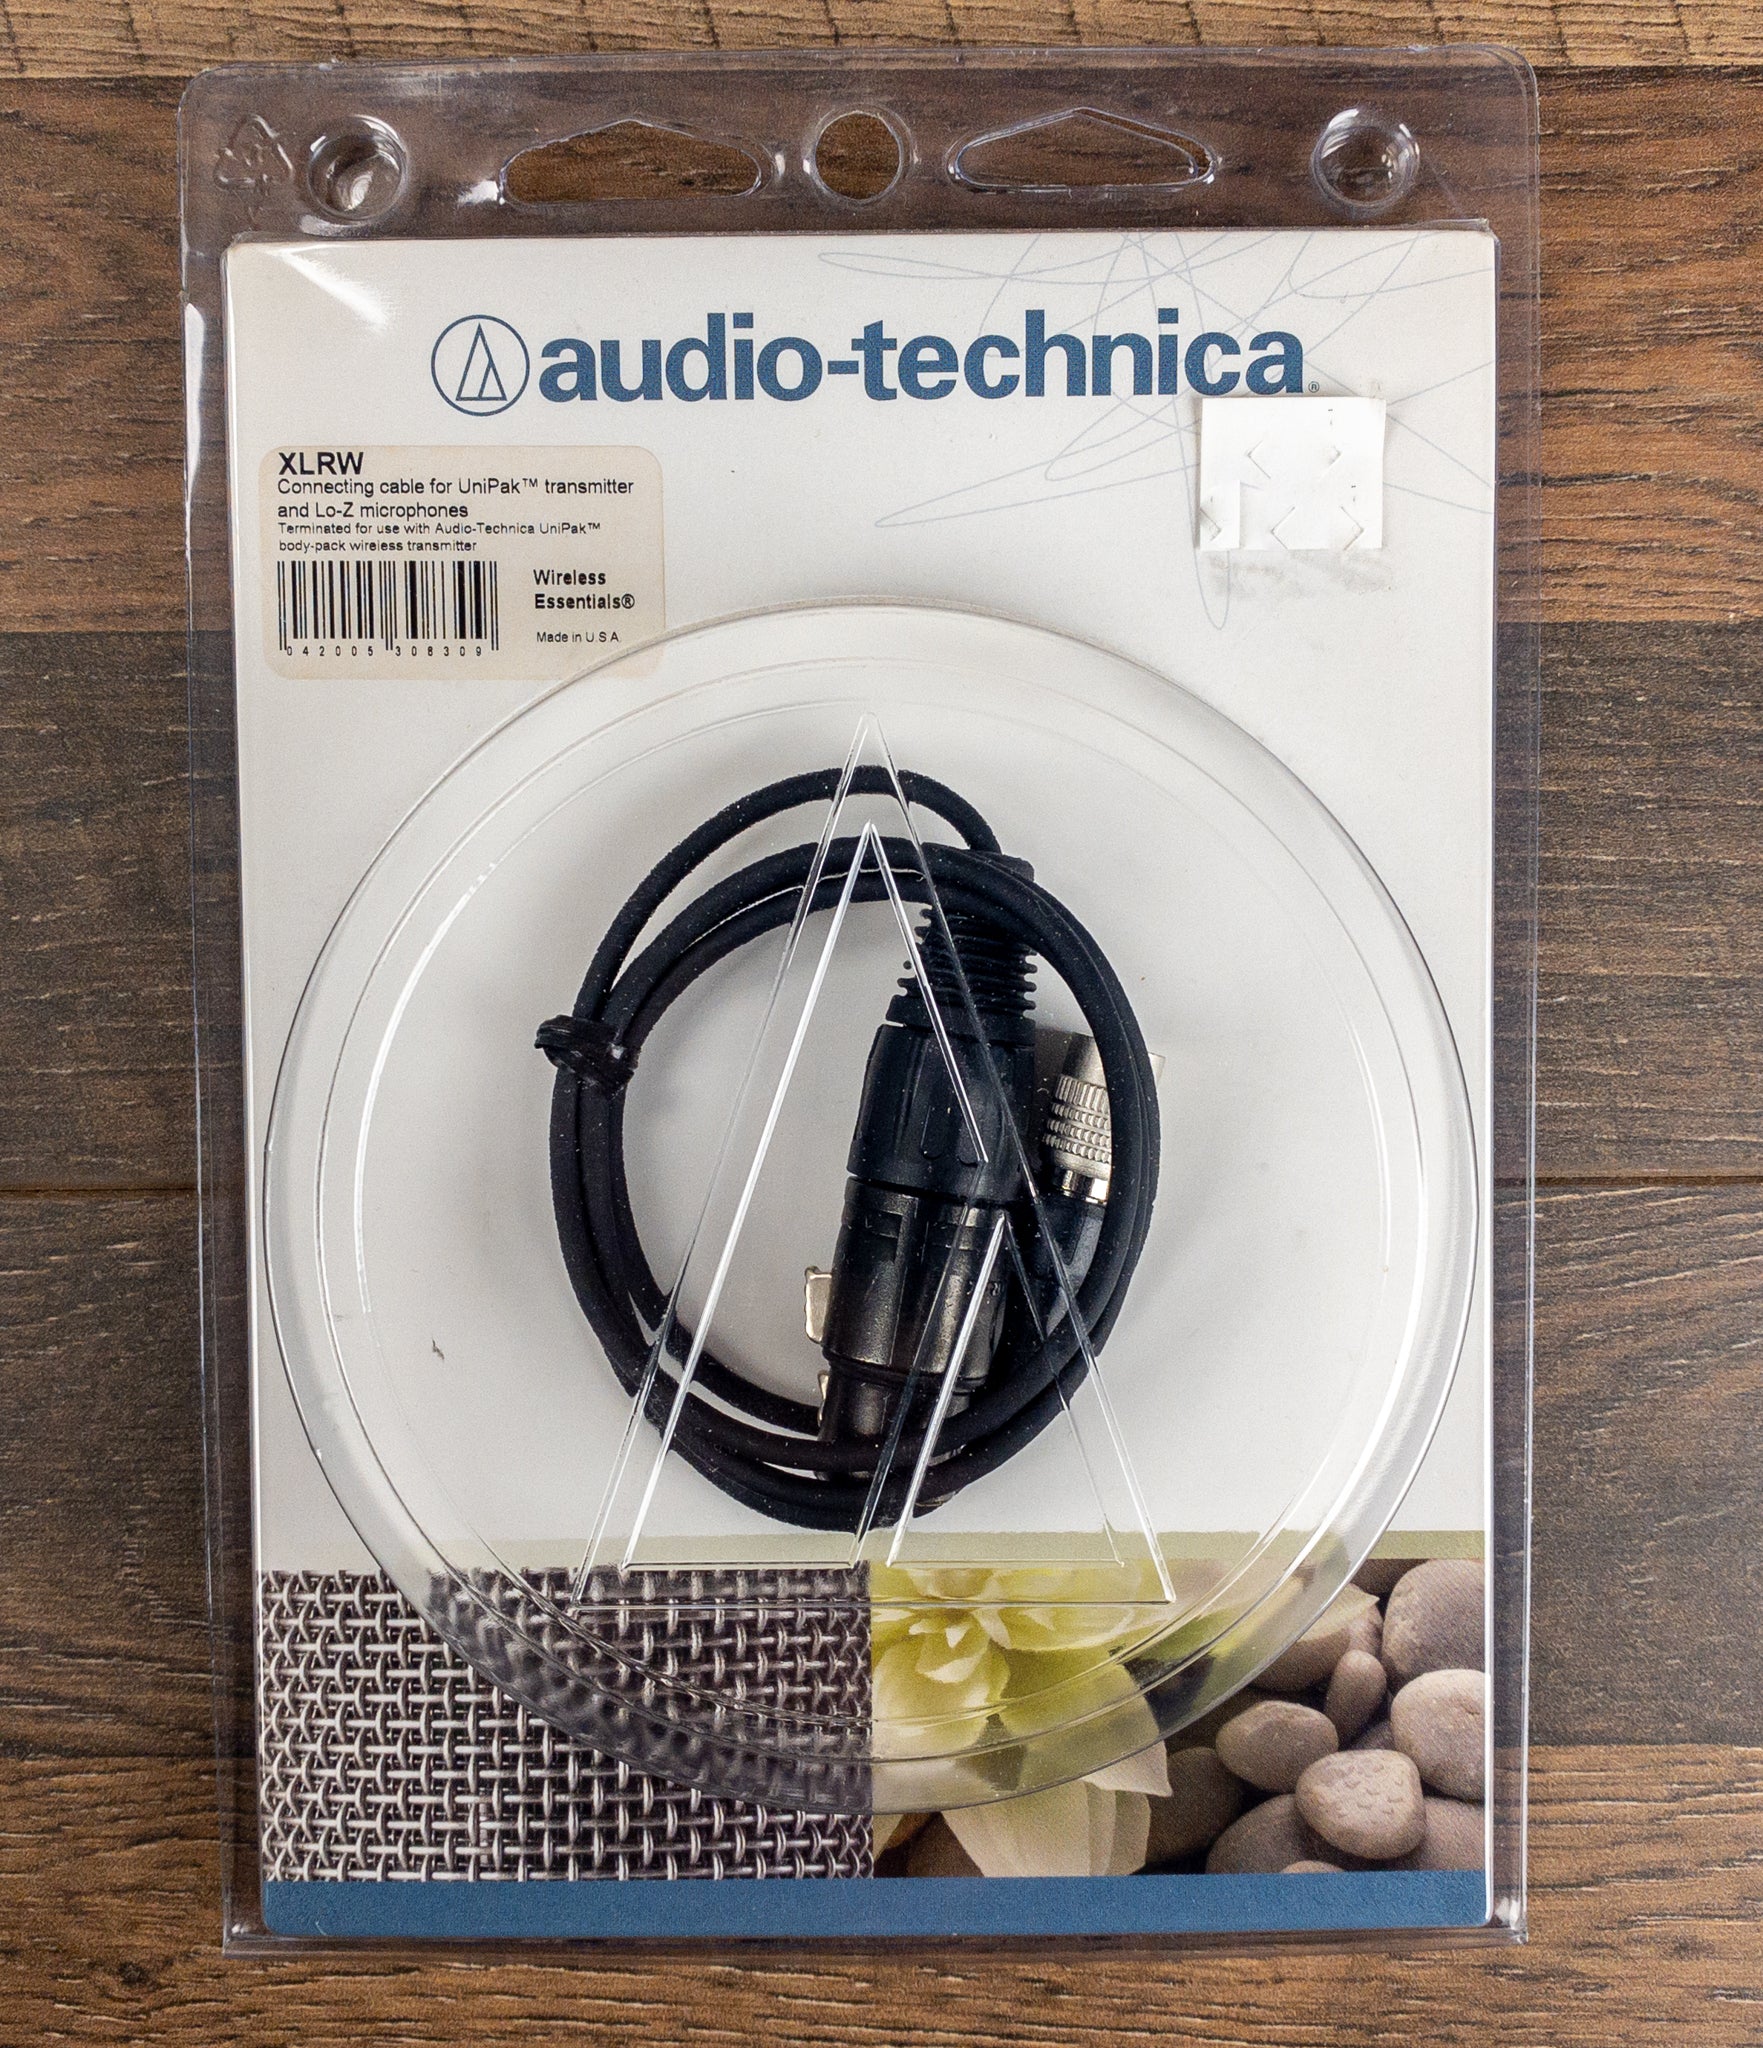 Audio-Technica XLRW XLR Microphone to cW Cable for AT Wireless Body Packs